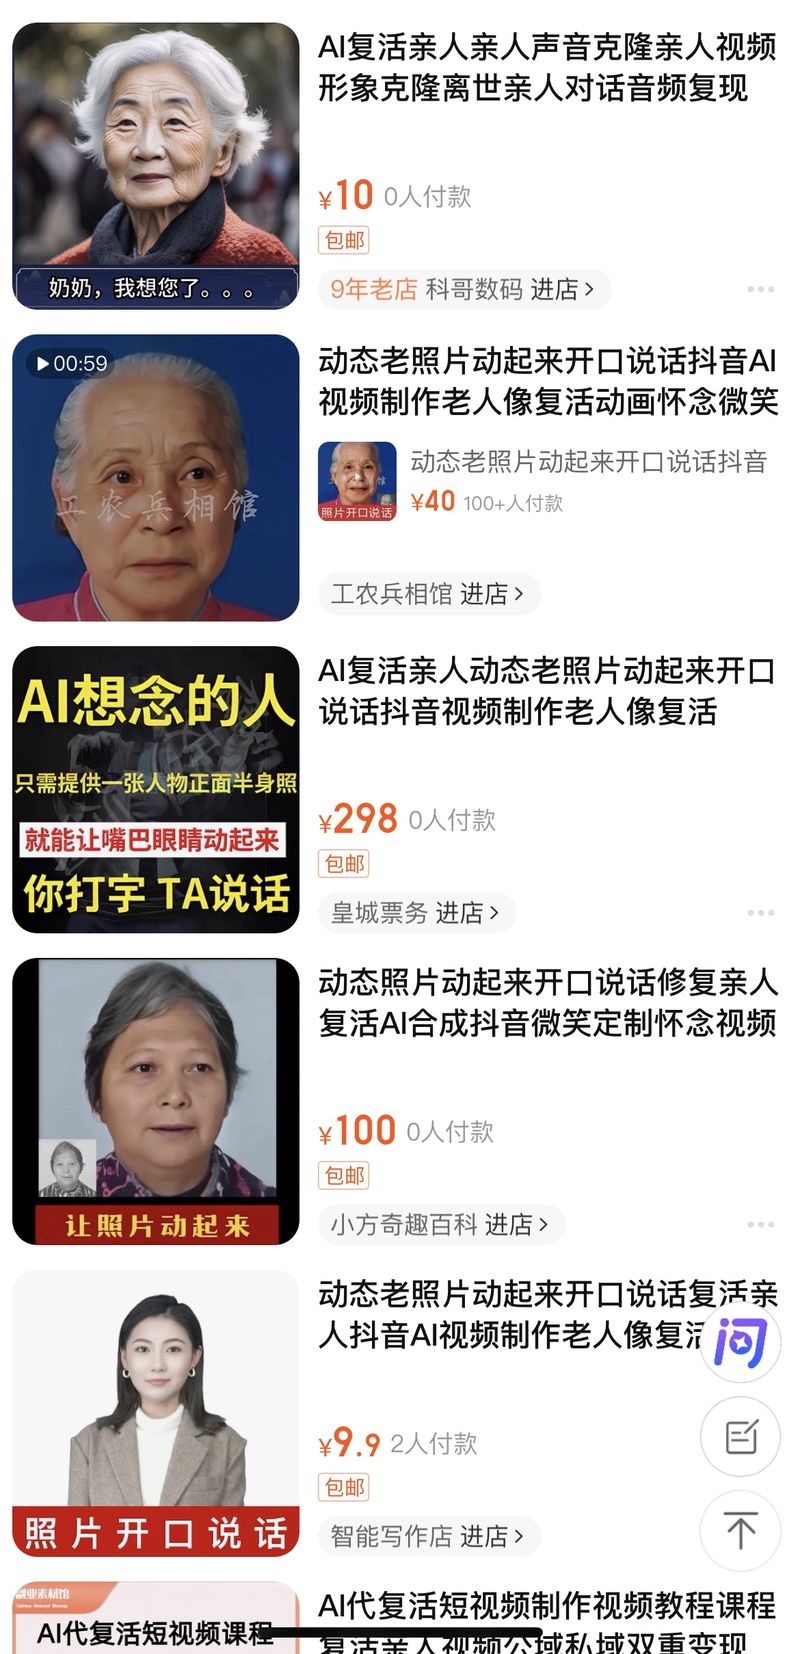 Screenshot of AI "revival services" offered on e-commerce platform Taobao